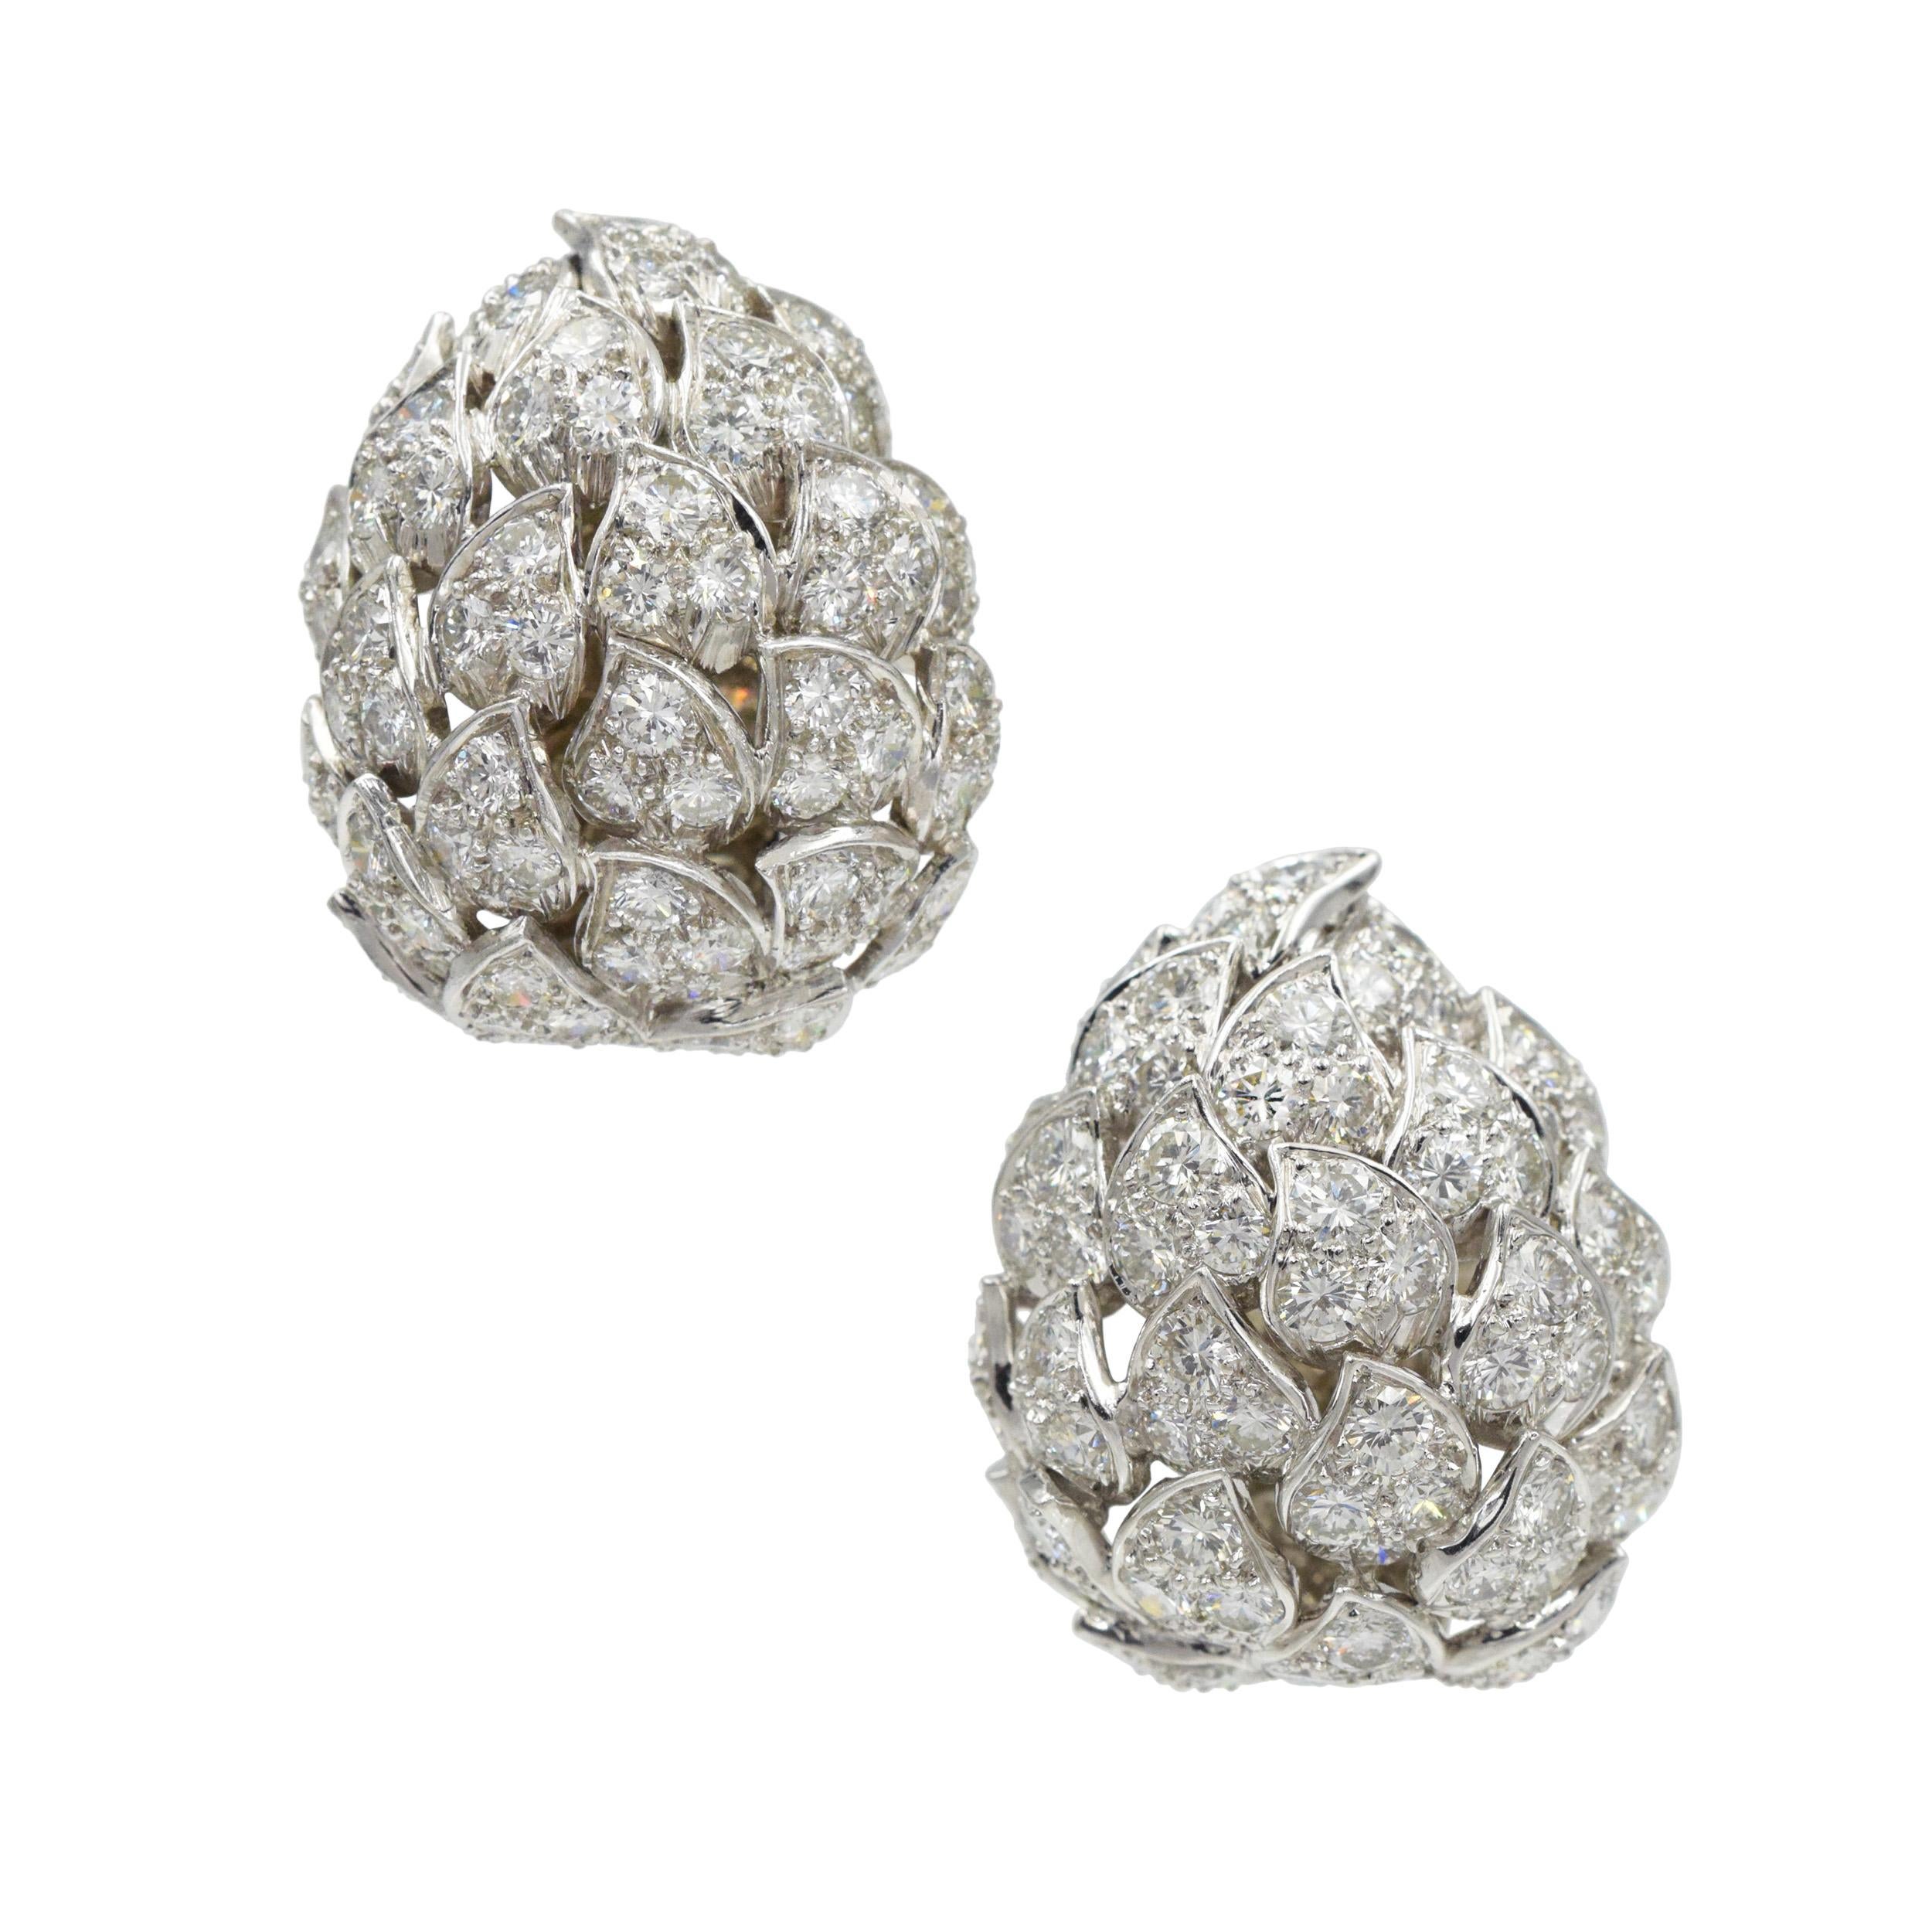 Contemporary Van Cleef and Arpels Diamond Cufflinks  For Sale